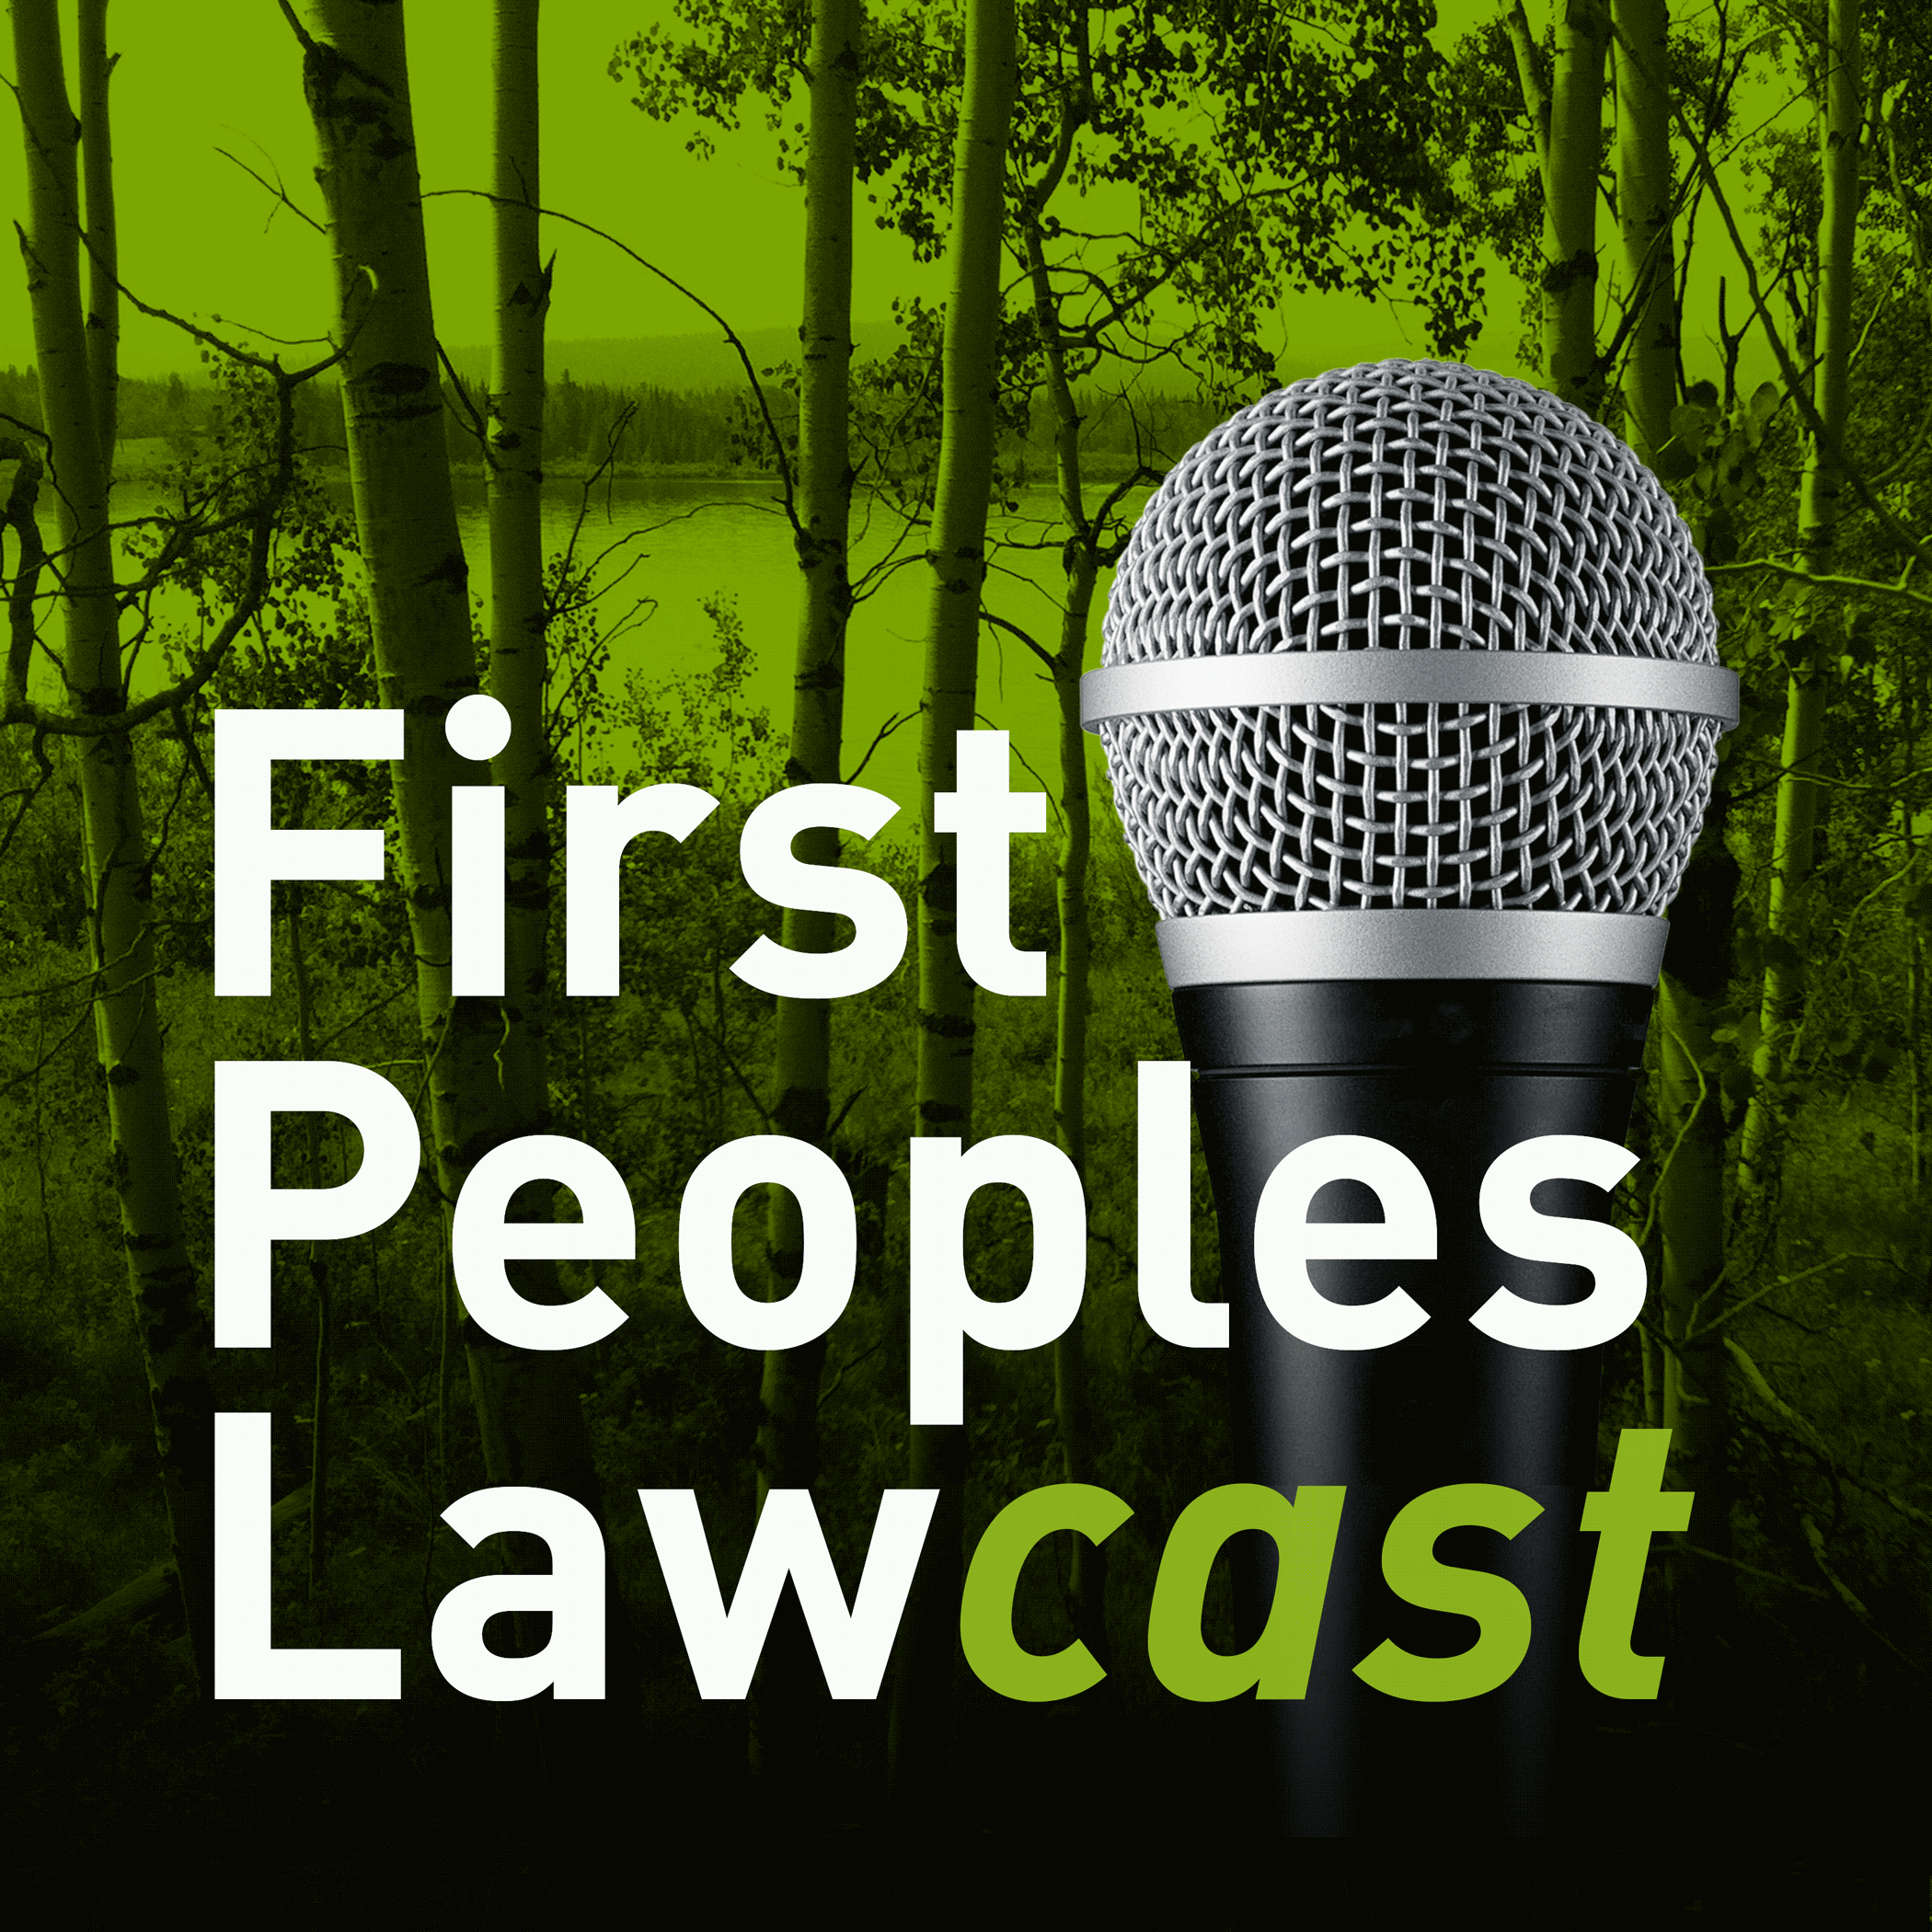 First Peoples Lawcast